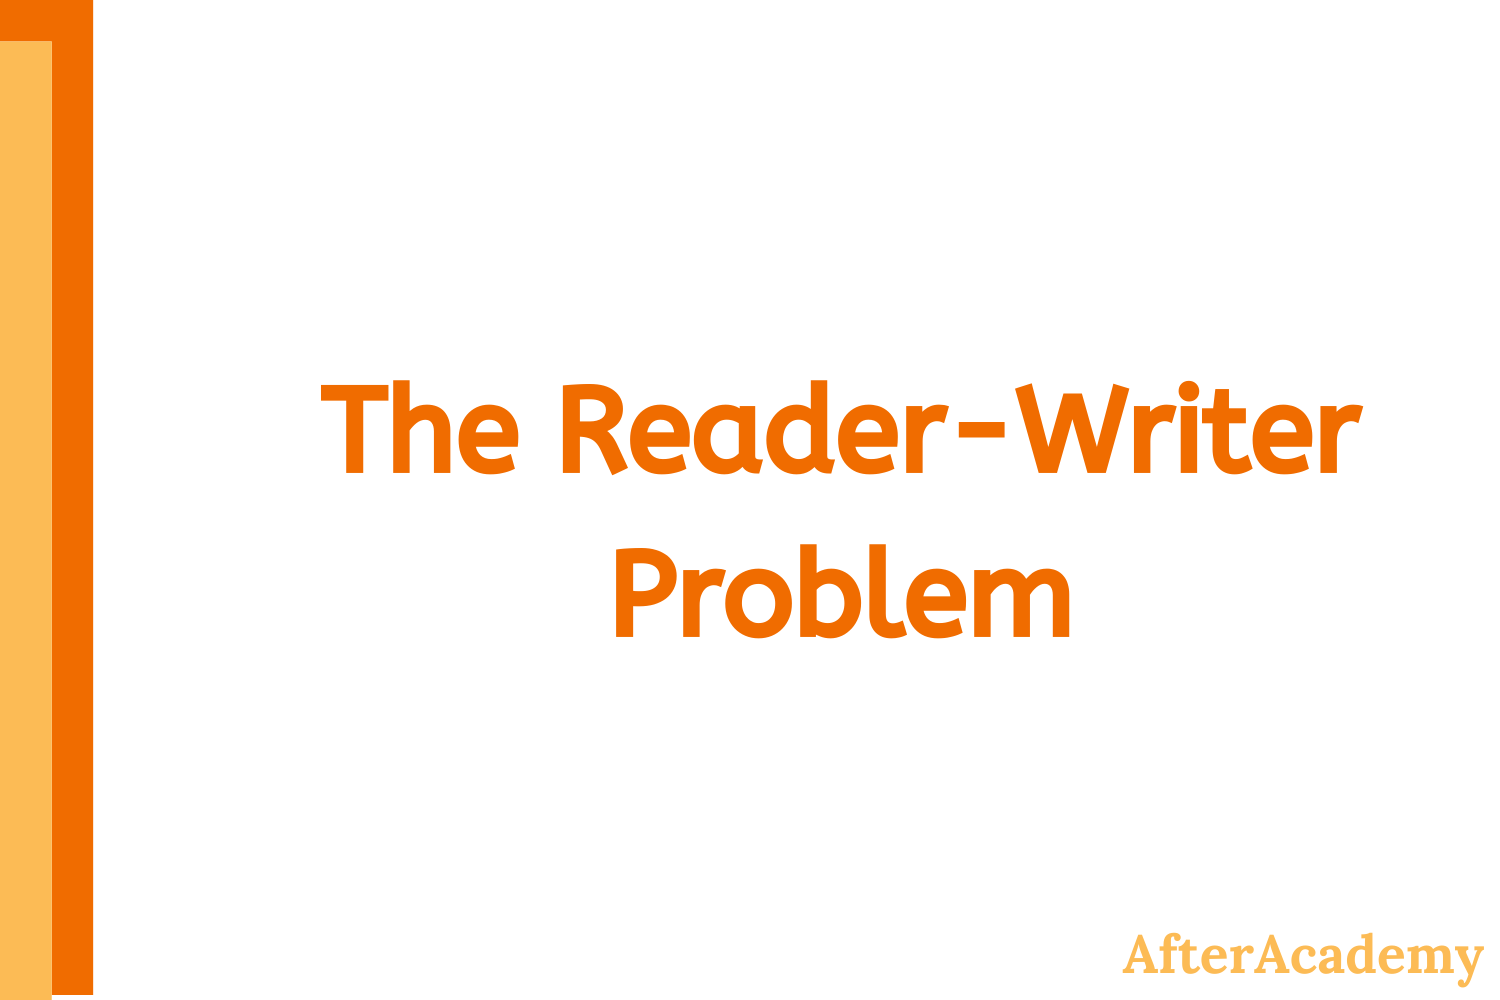 The Reader-Writer Problem in Operating System